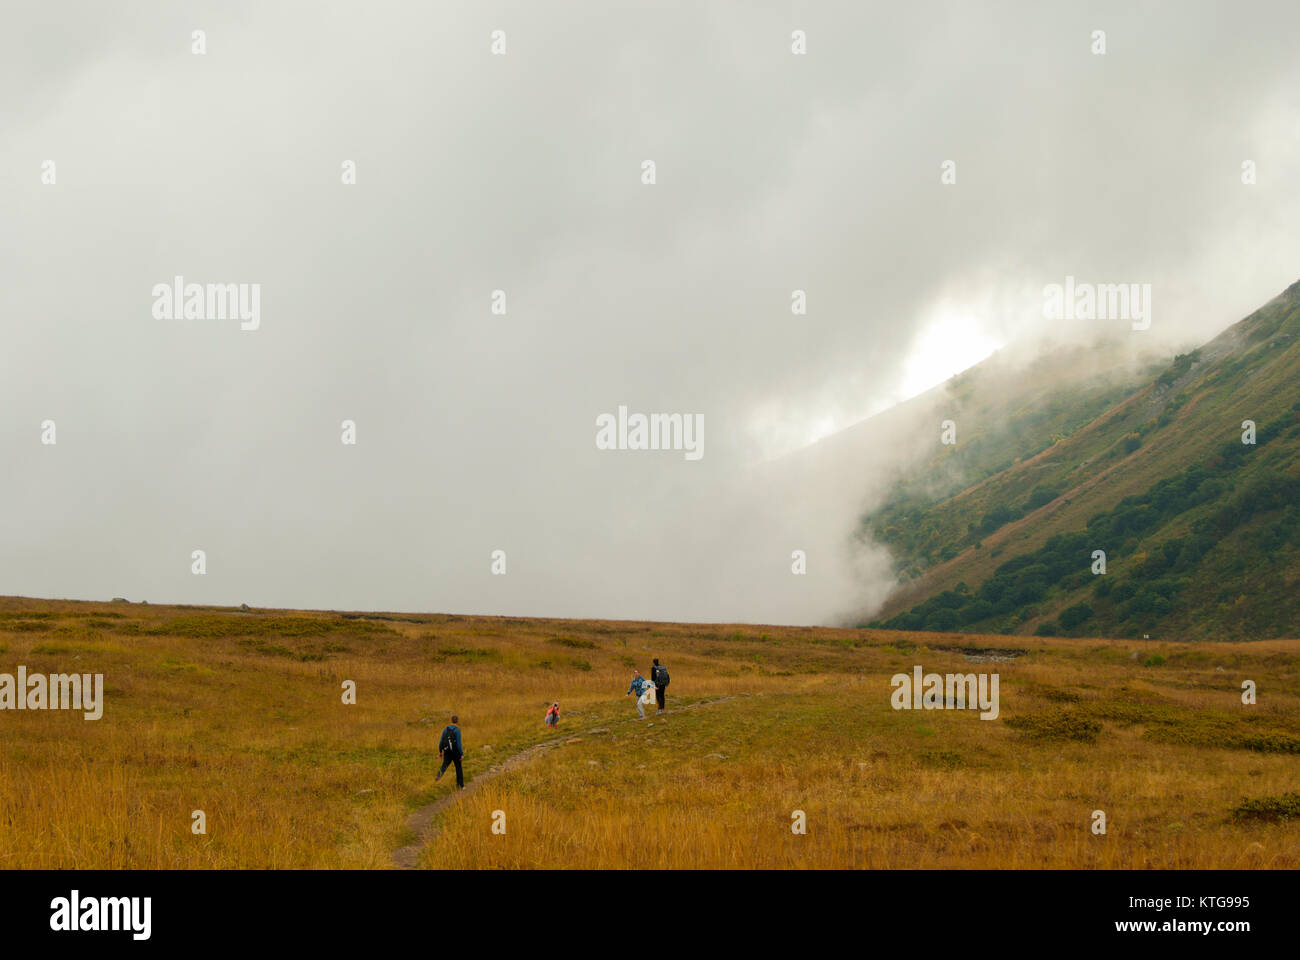 RUSSIA, KRASNODAR KRAI - SEPTEMBER 23, 2017: tourists walk on a mountain plateau in Caucasus Nature Reserve, admiring the cloud rising from behind the Stock Photo